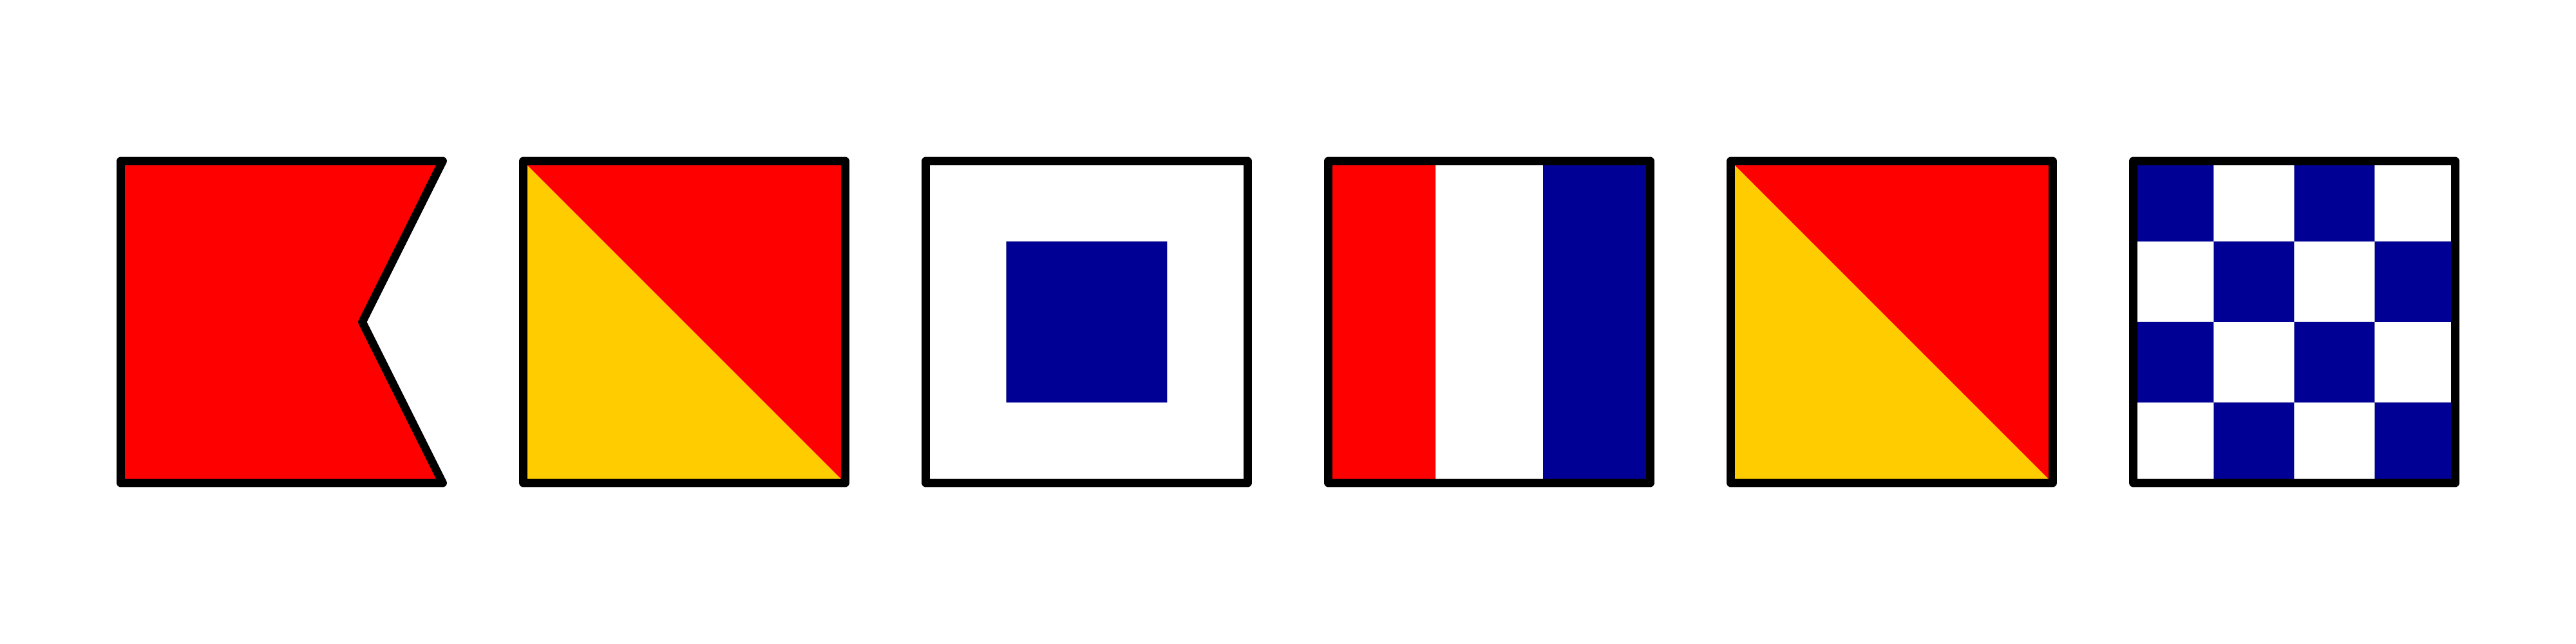 6 square flags in a row: 1, red swallow tail, 2 & 5, half yellow & red divided by diagonal, 3, white with blue square, 4, red white & blue vertical bars, 6, checkered blue and white